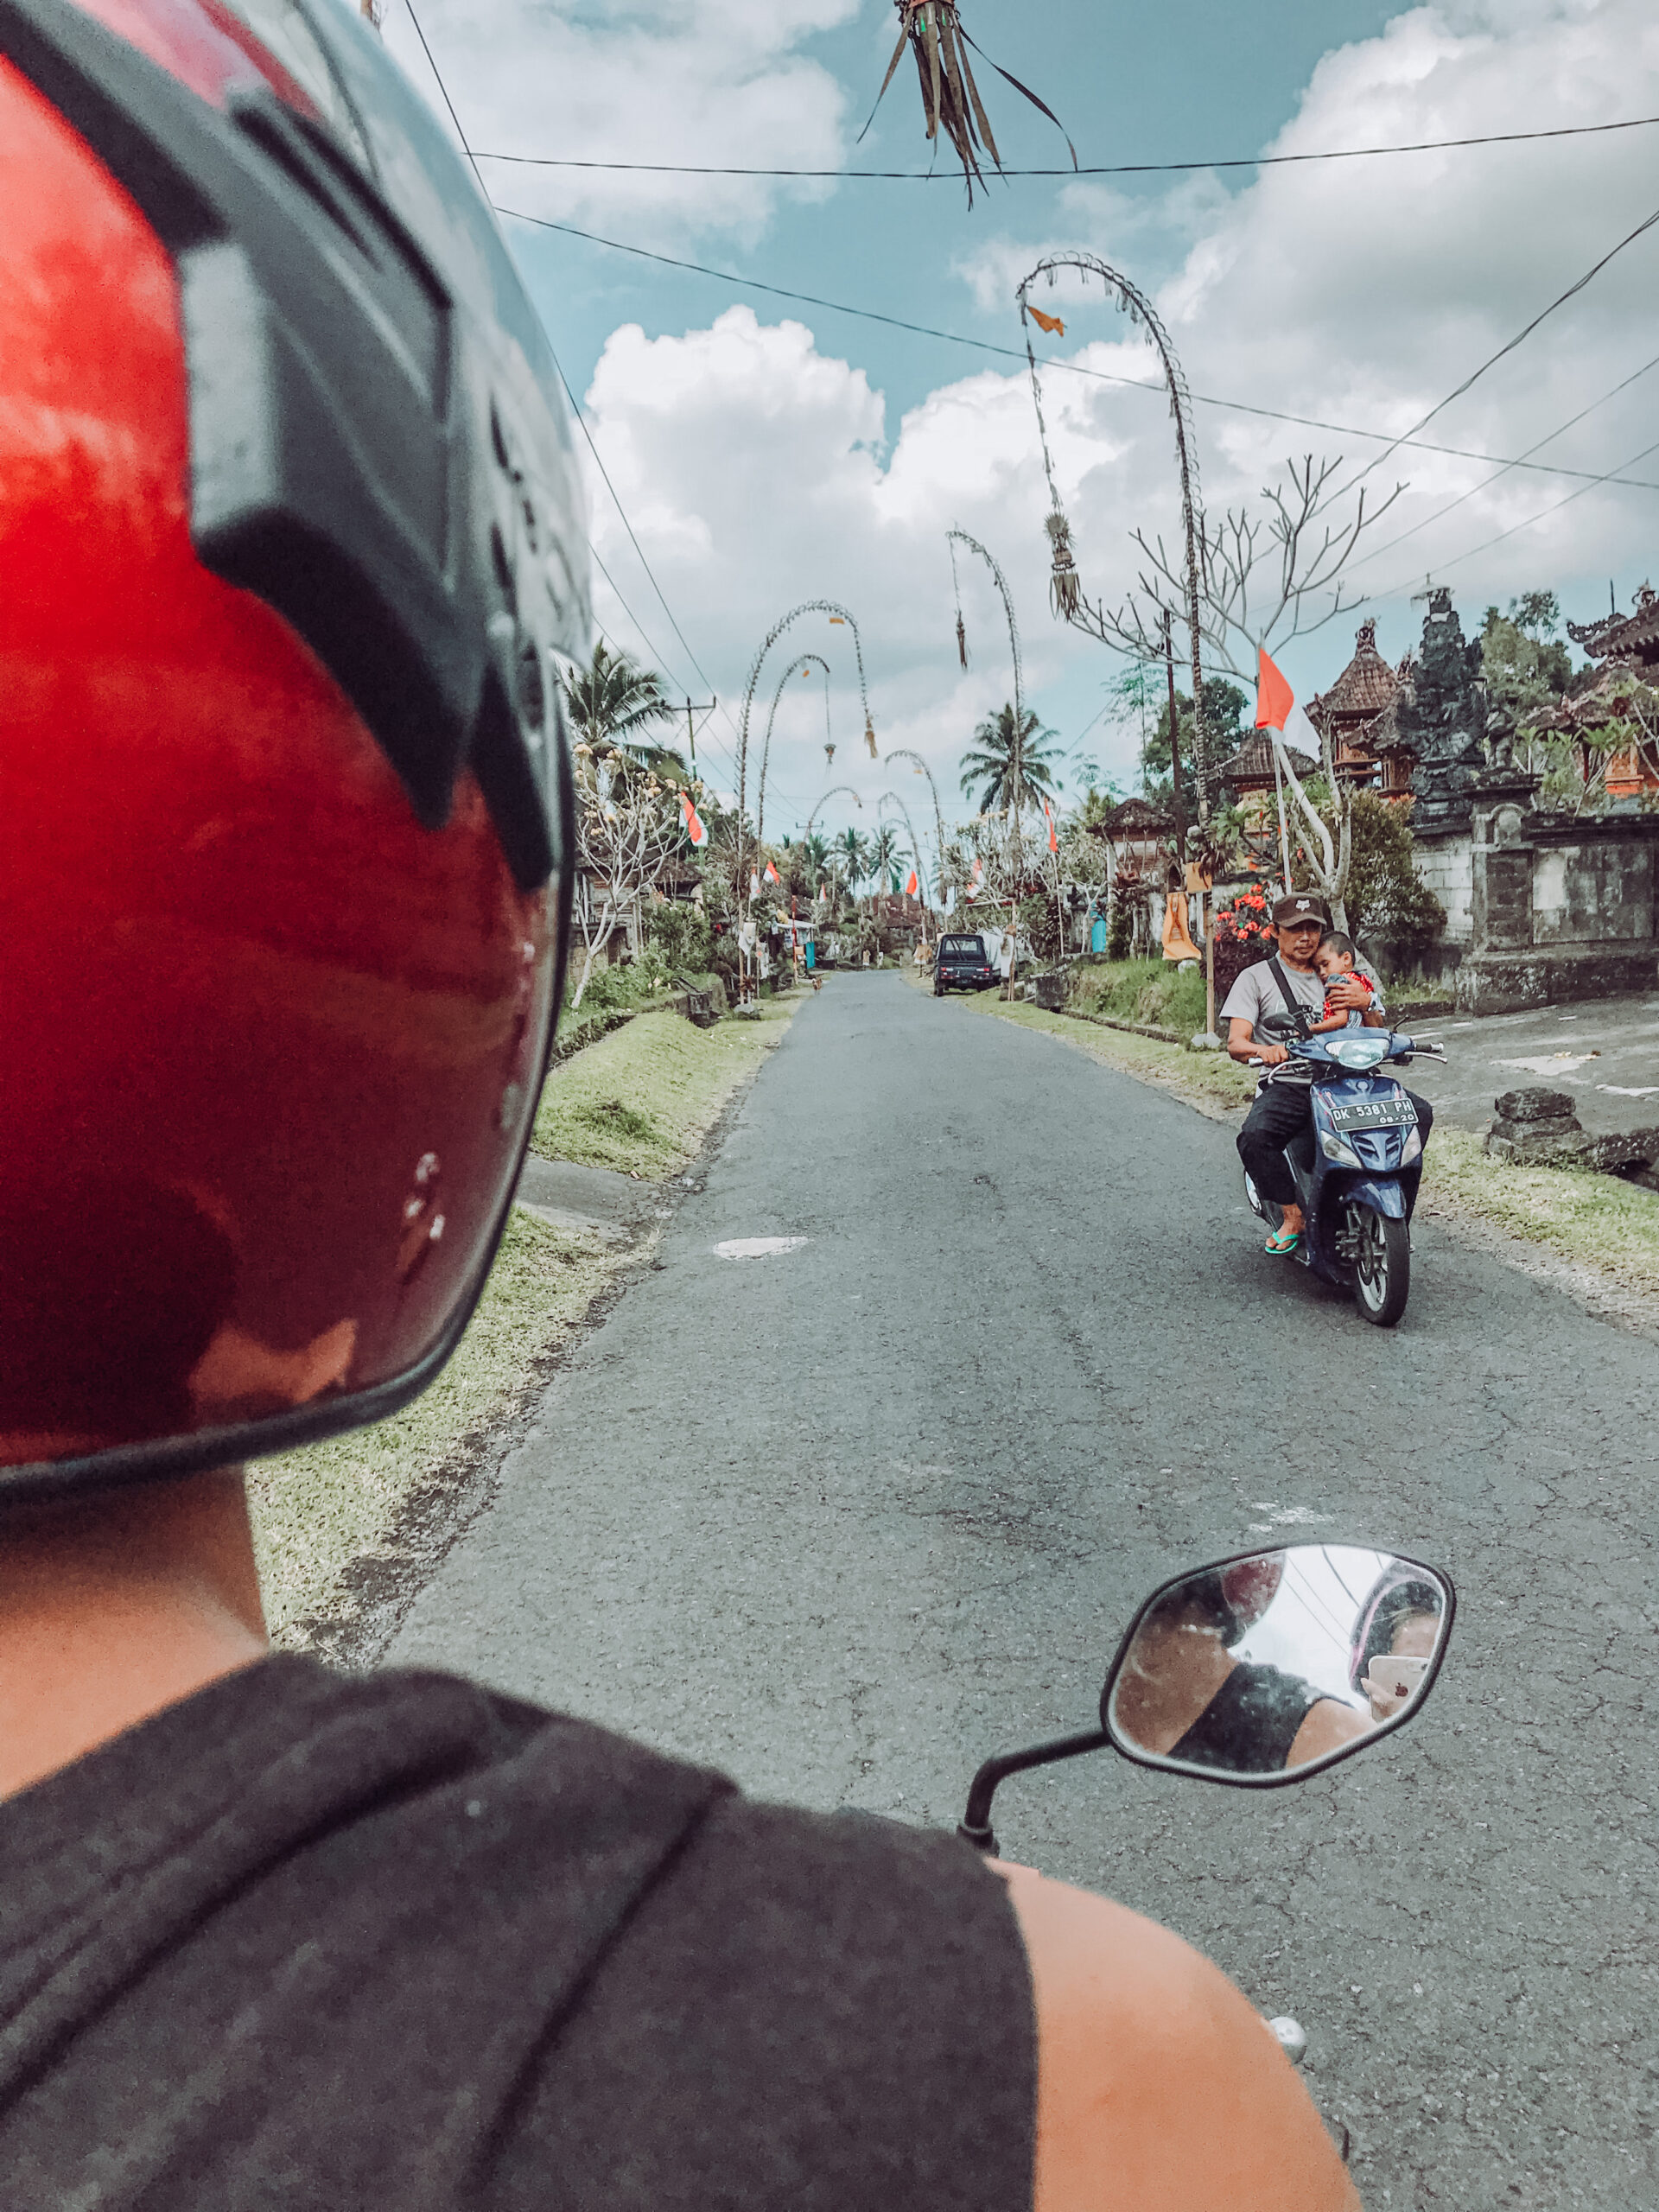 10 fun things to do in Ubud for an unforgettable time